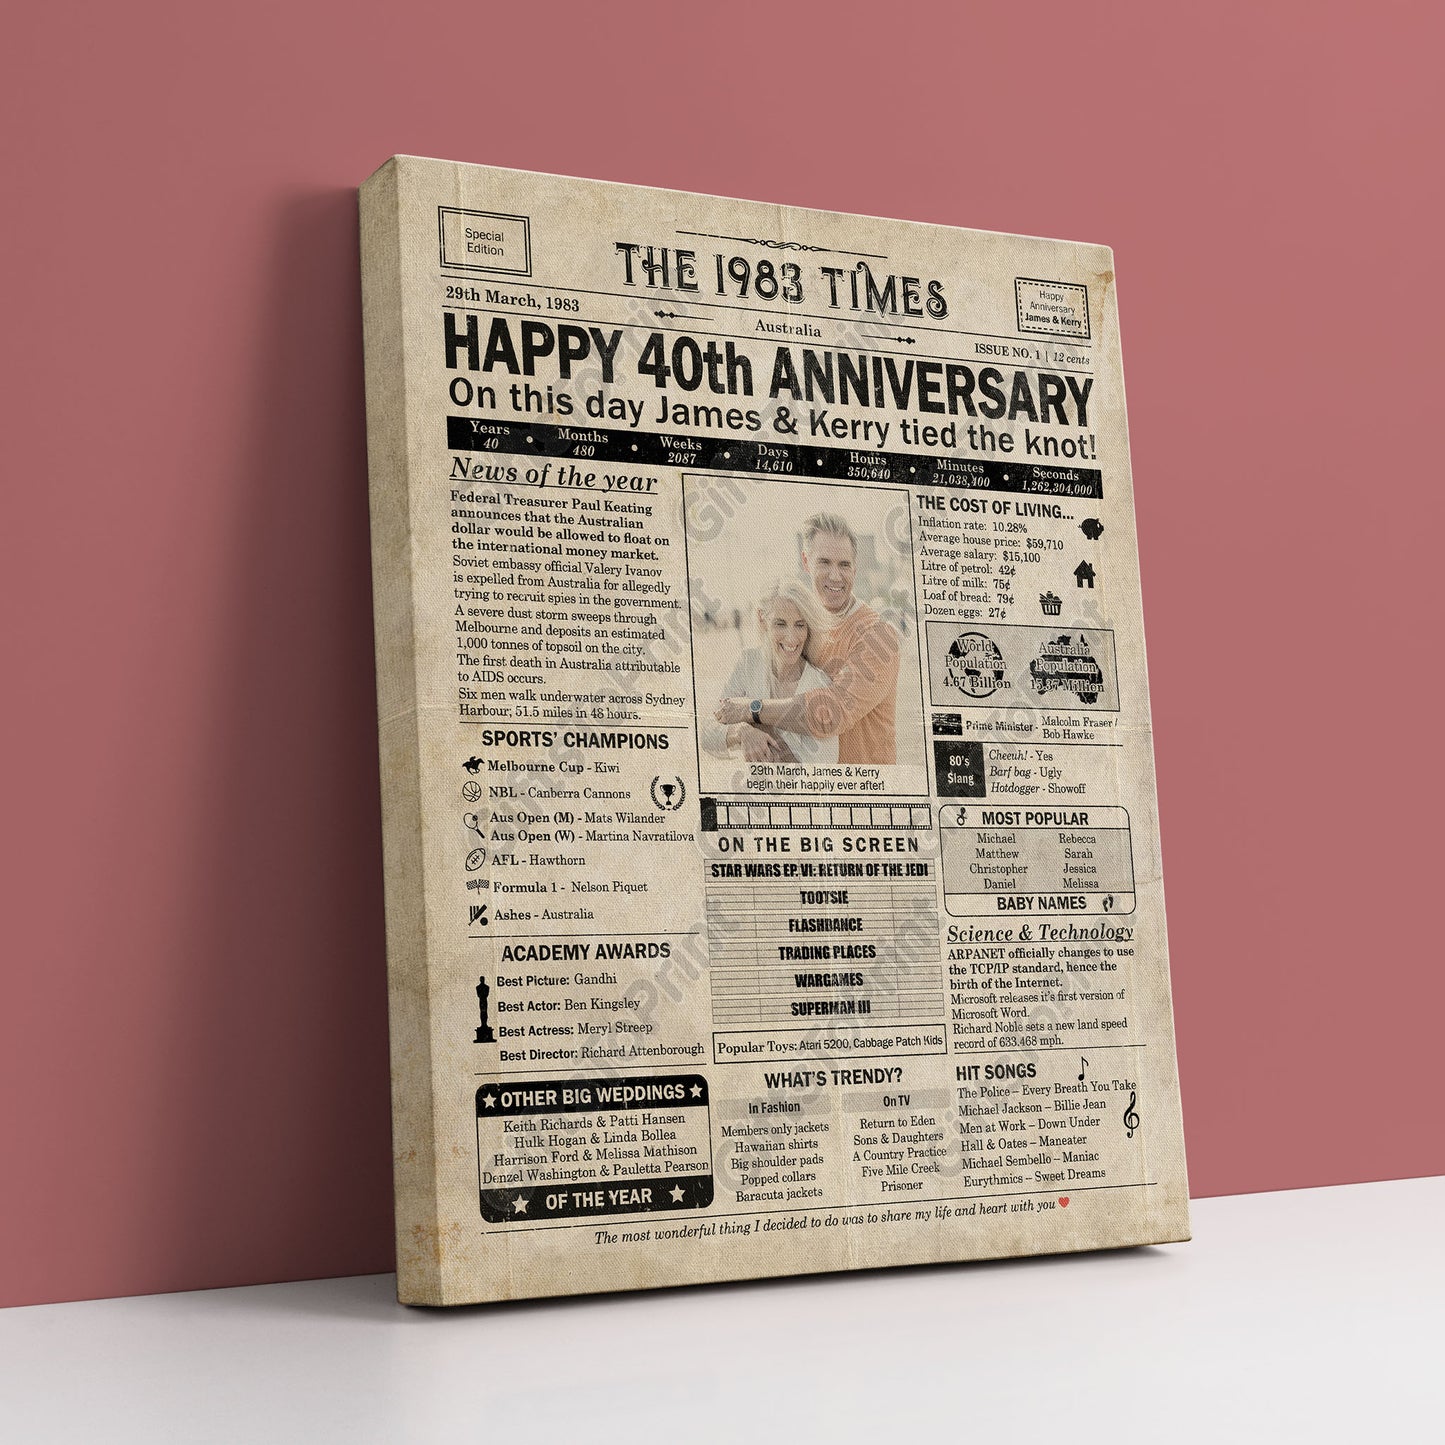 Personalised 40th Anniversary Gift: A Printable AUSTRALIAN Newspaper Poster of 1983